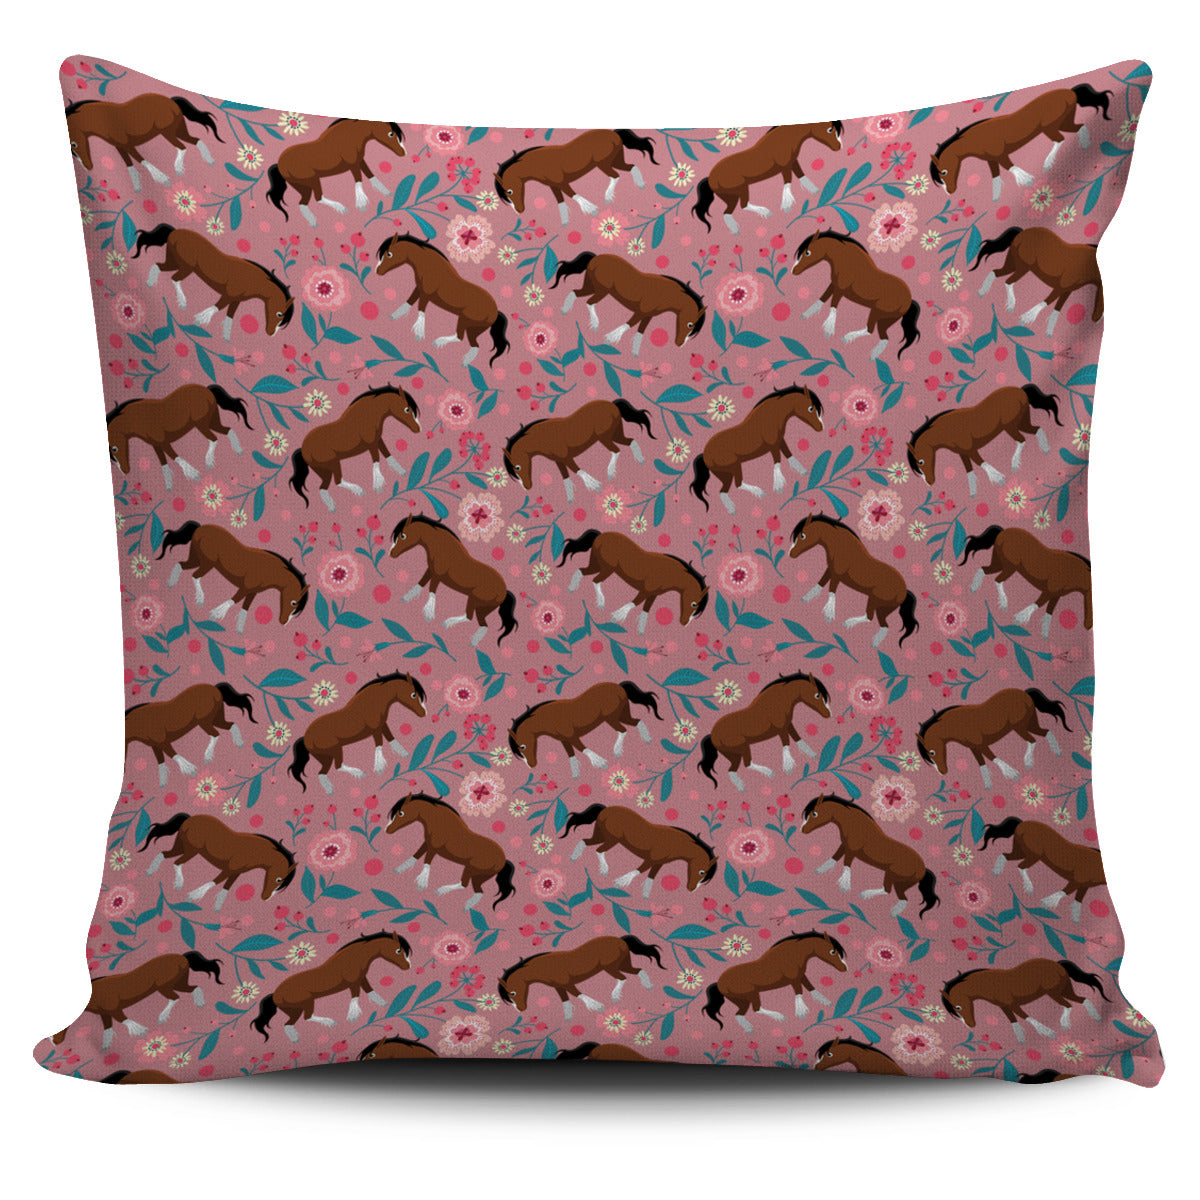 Clydesdale Floral Pillow Cover